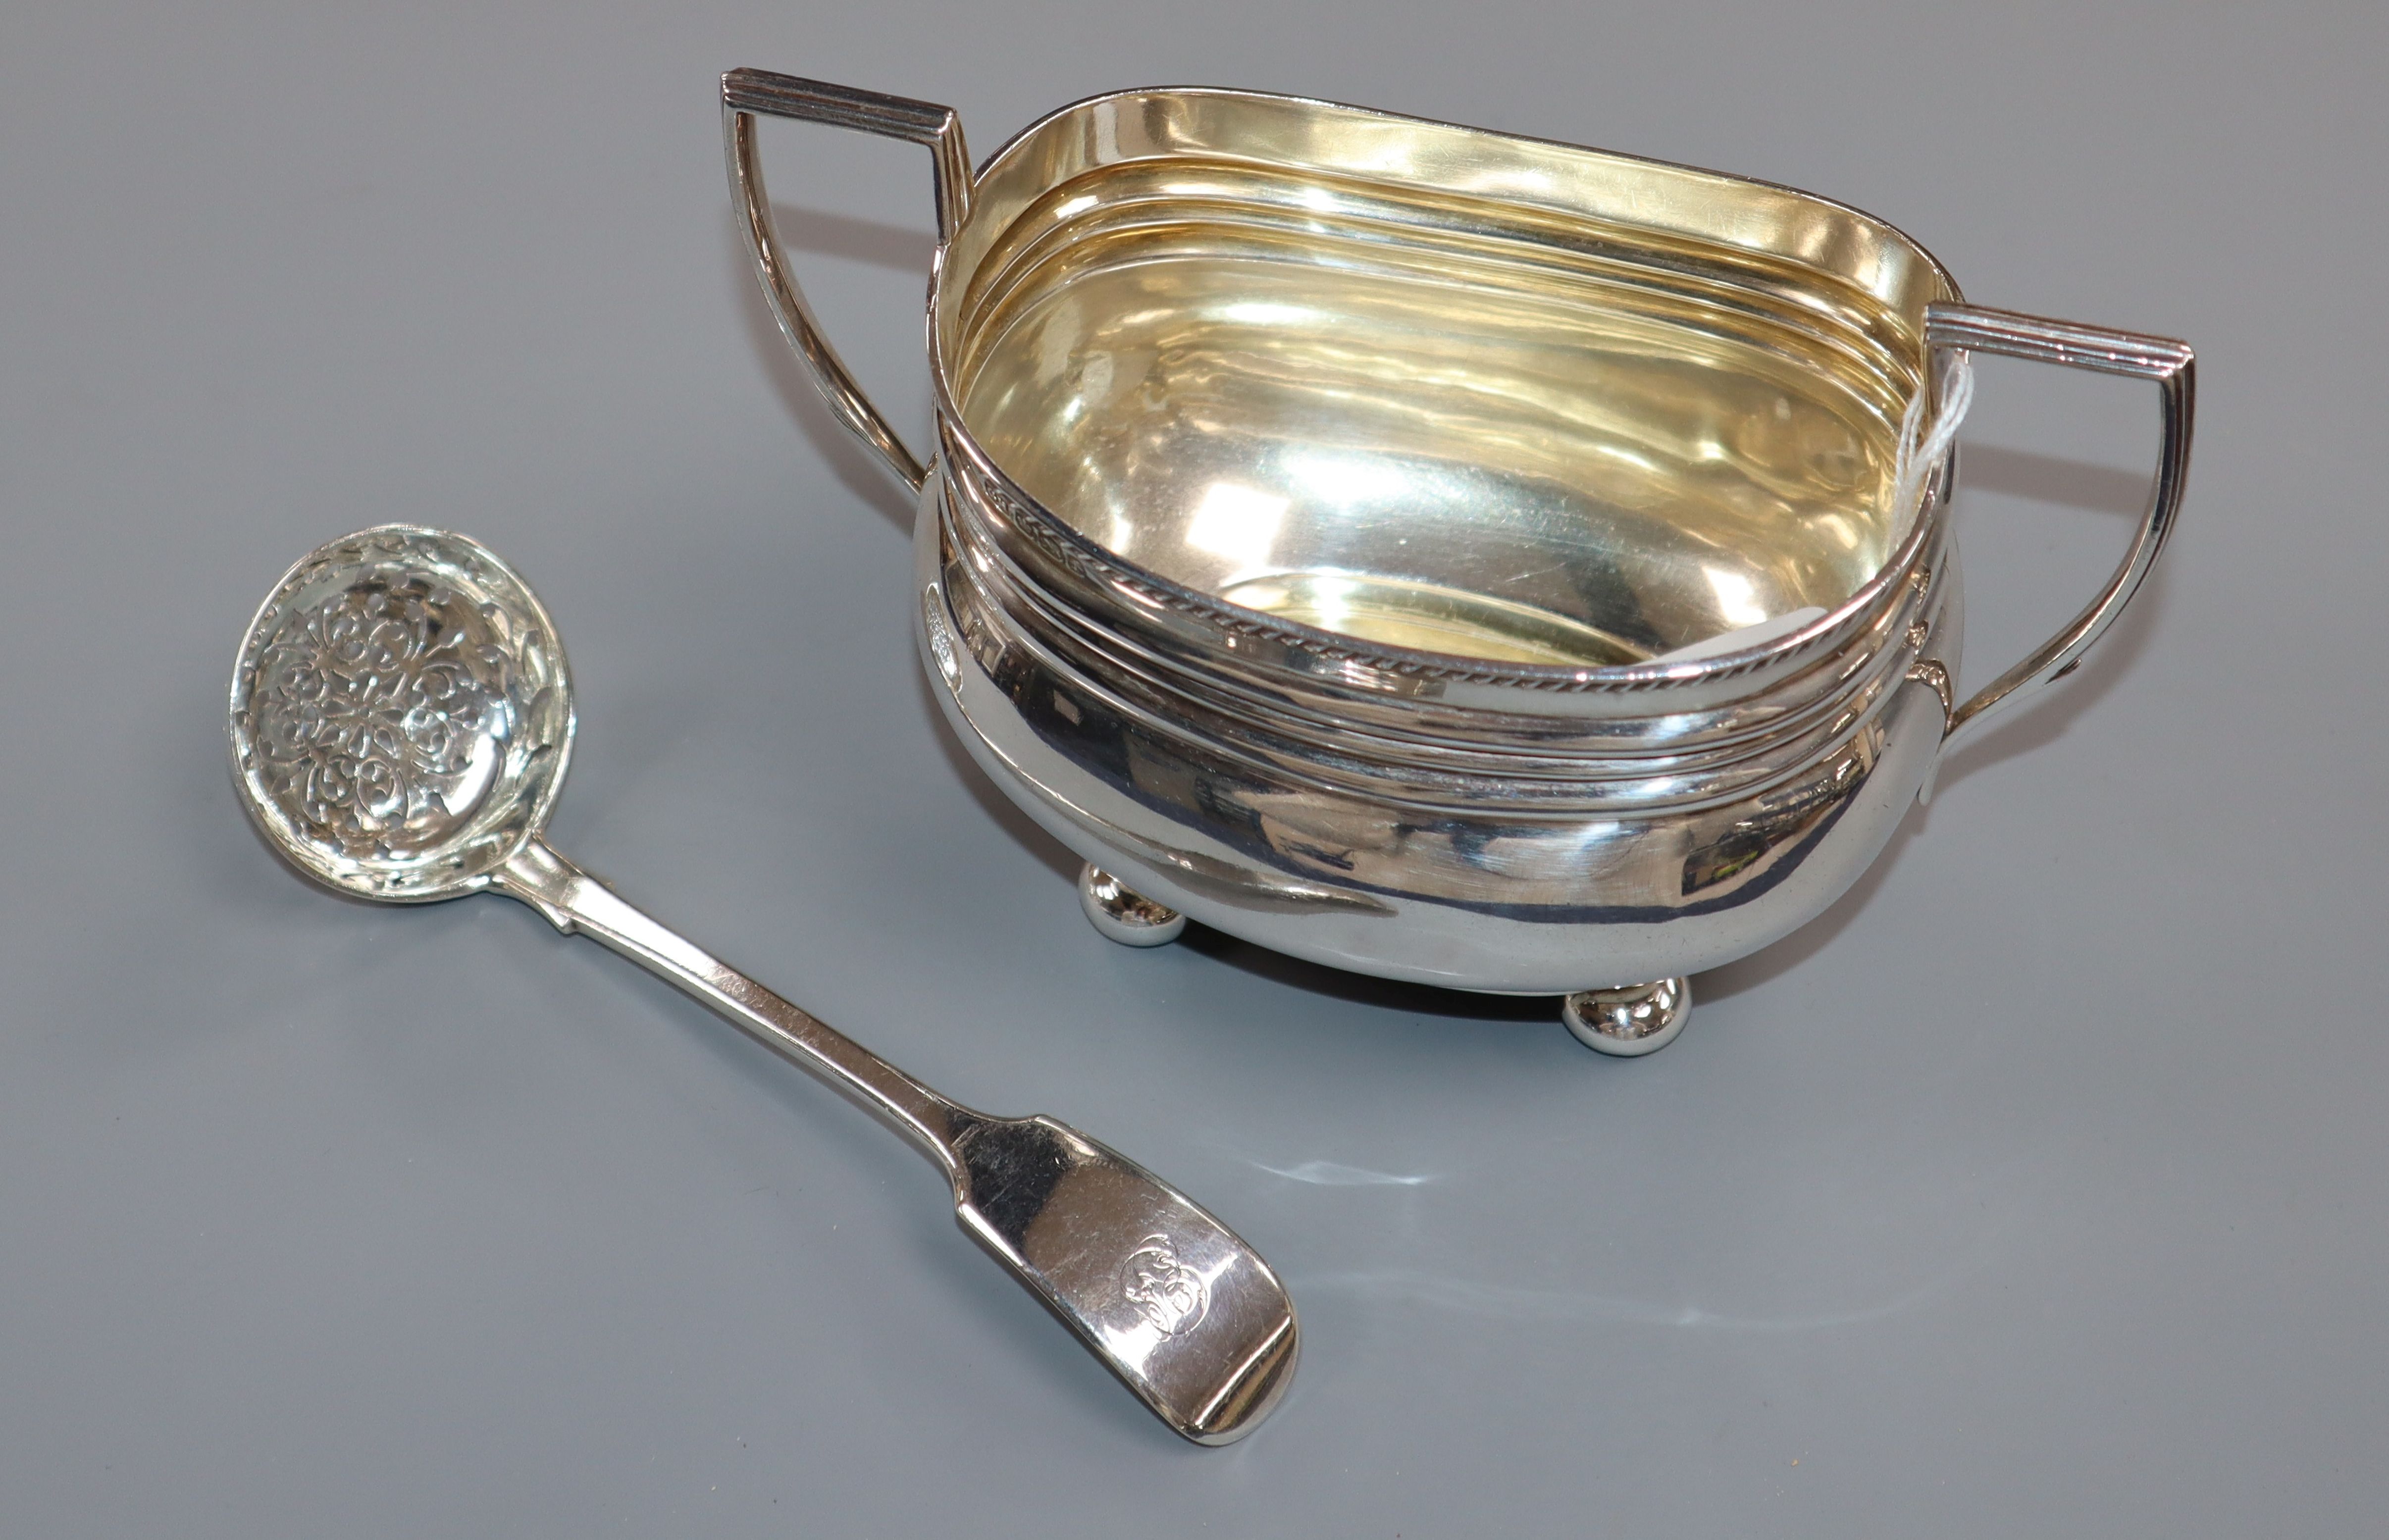 A George V silver sugar bowl and a Victorian silver fiddle pattern sifter spoon.